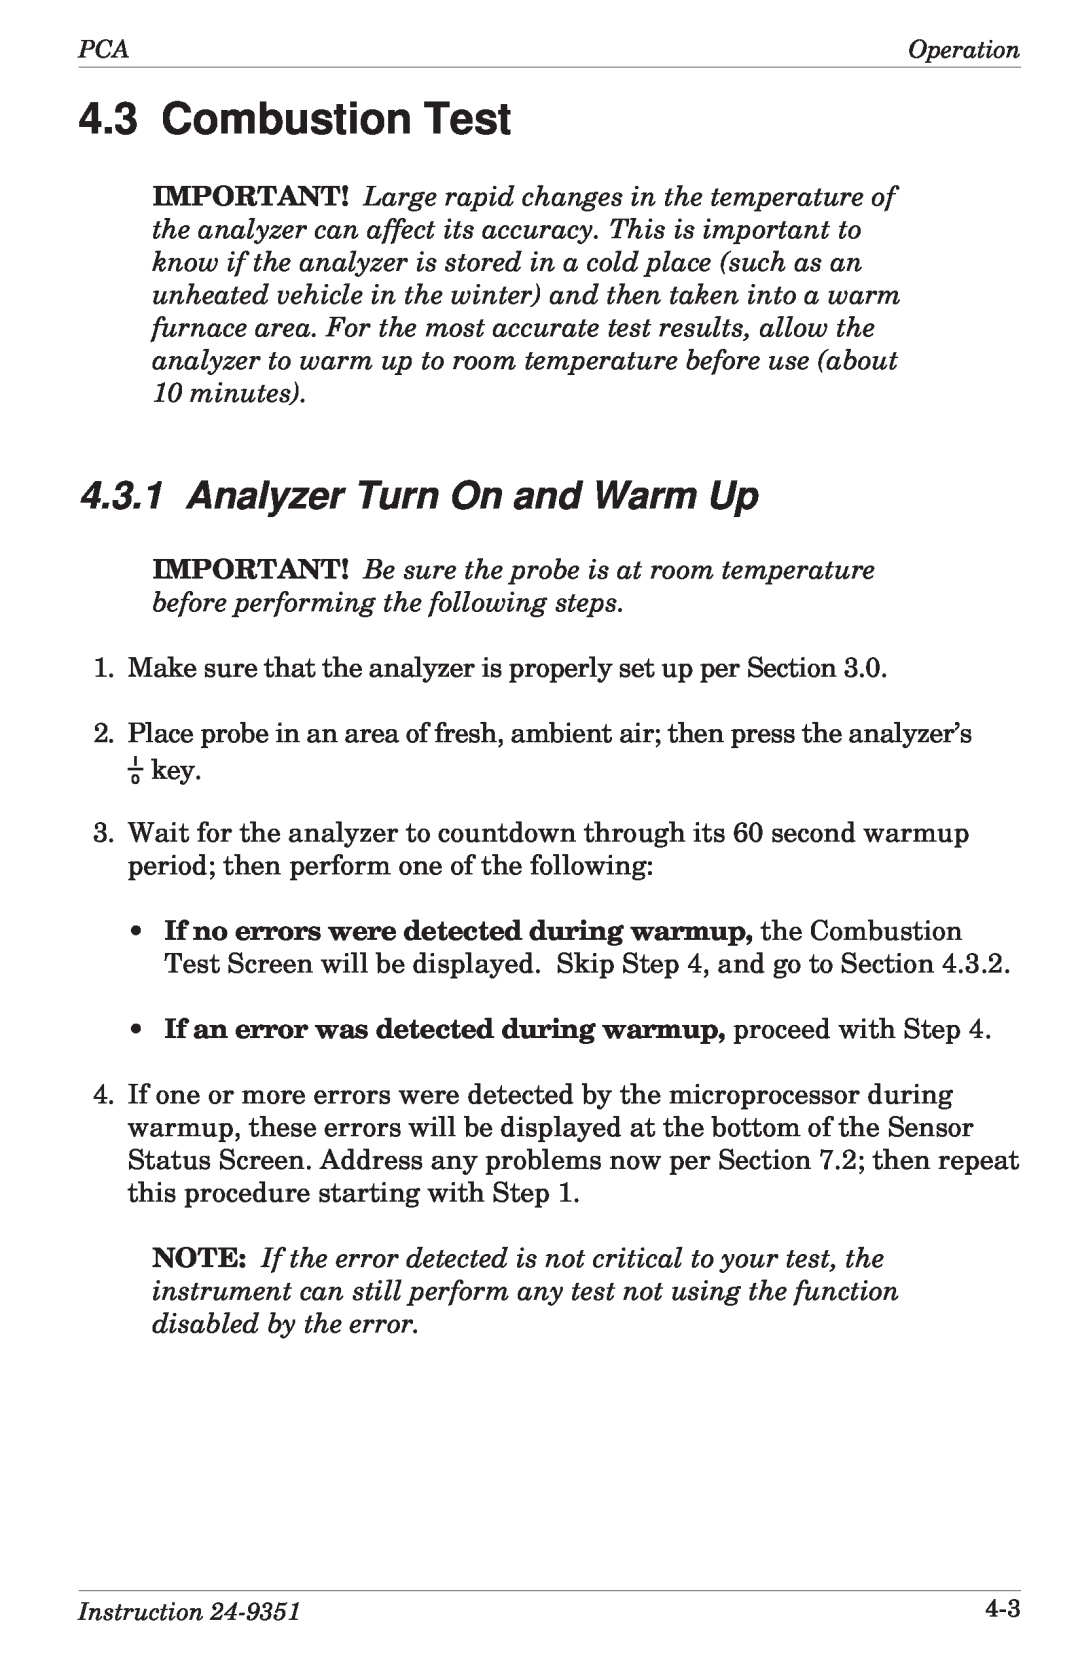 Bacharach 24-9351 manual Combustion Test, 4.3.1Analyzer Turn On and Warm Up, 10minutes 